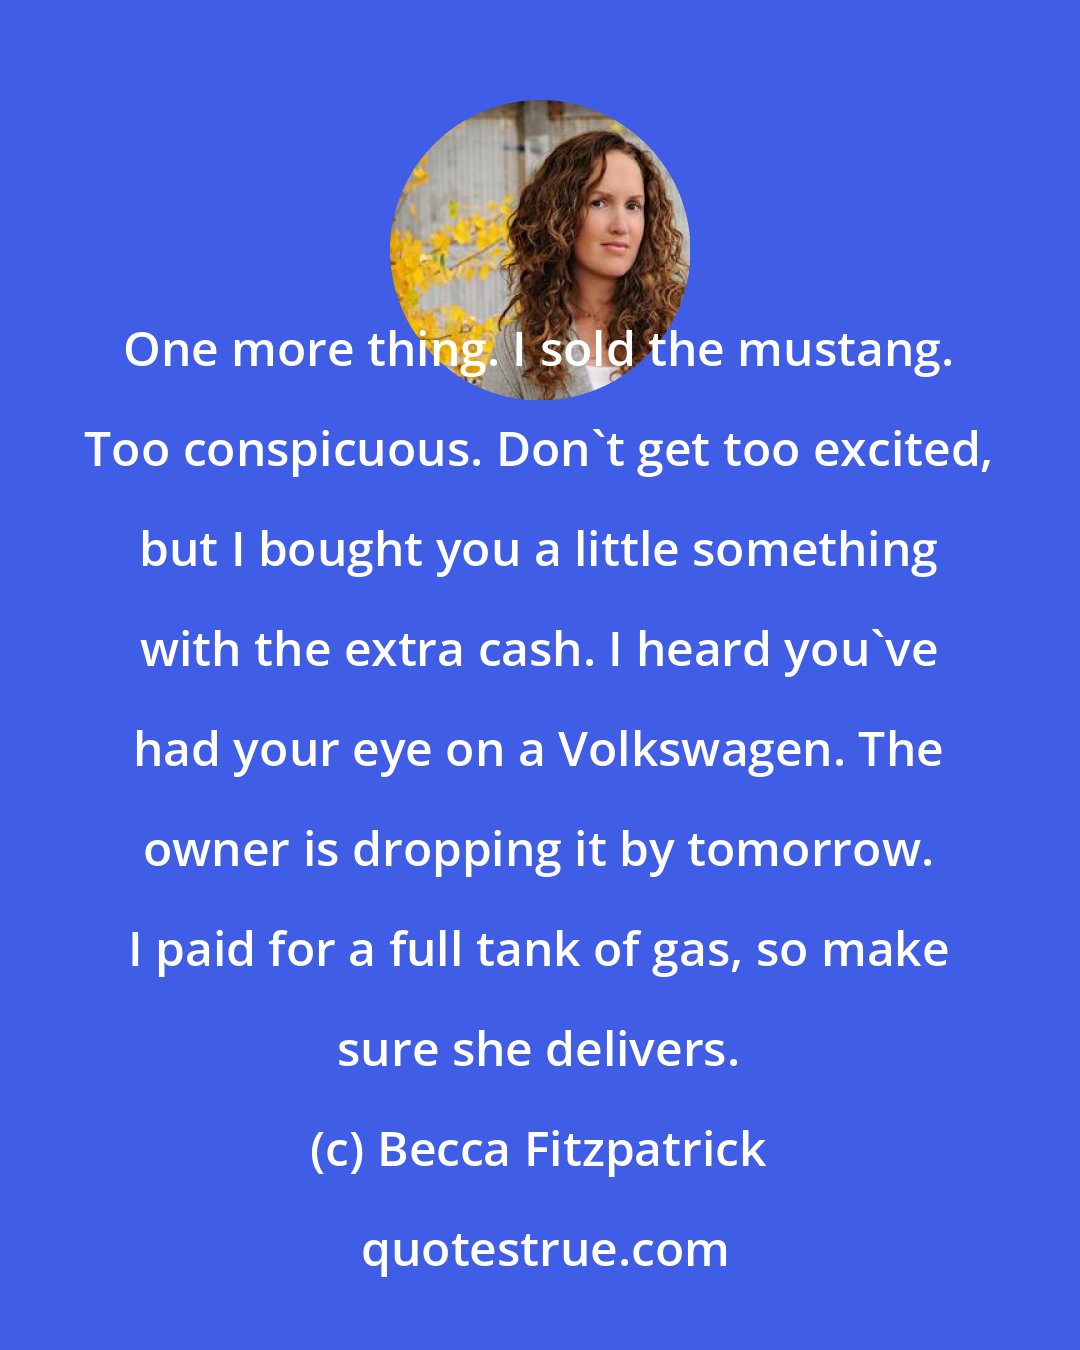 Becca Fitzpatrick: One more thing. I sold the mustang. Too conspicuous. Don't get too excited, but I bought you a little something with the extra cash. I heard you've had your eye on a Volkswagen. The owner is dropping it by tomorrow. I paid for a full tank of gas, so make sure she delivers.